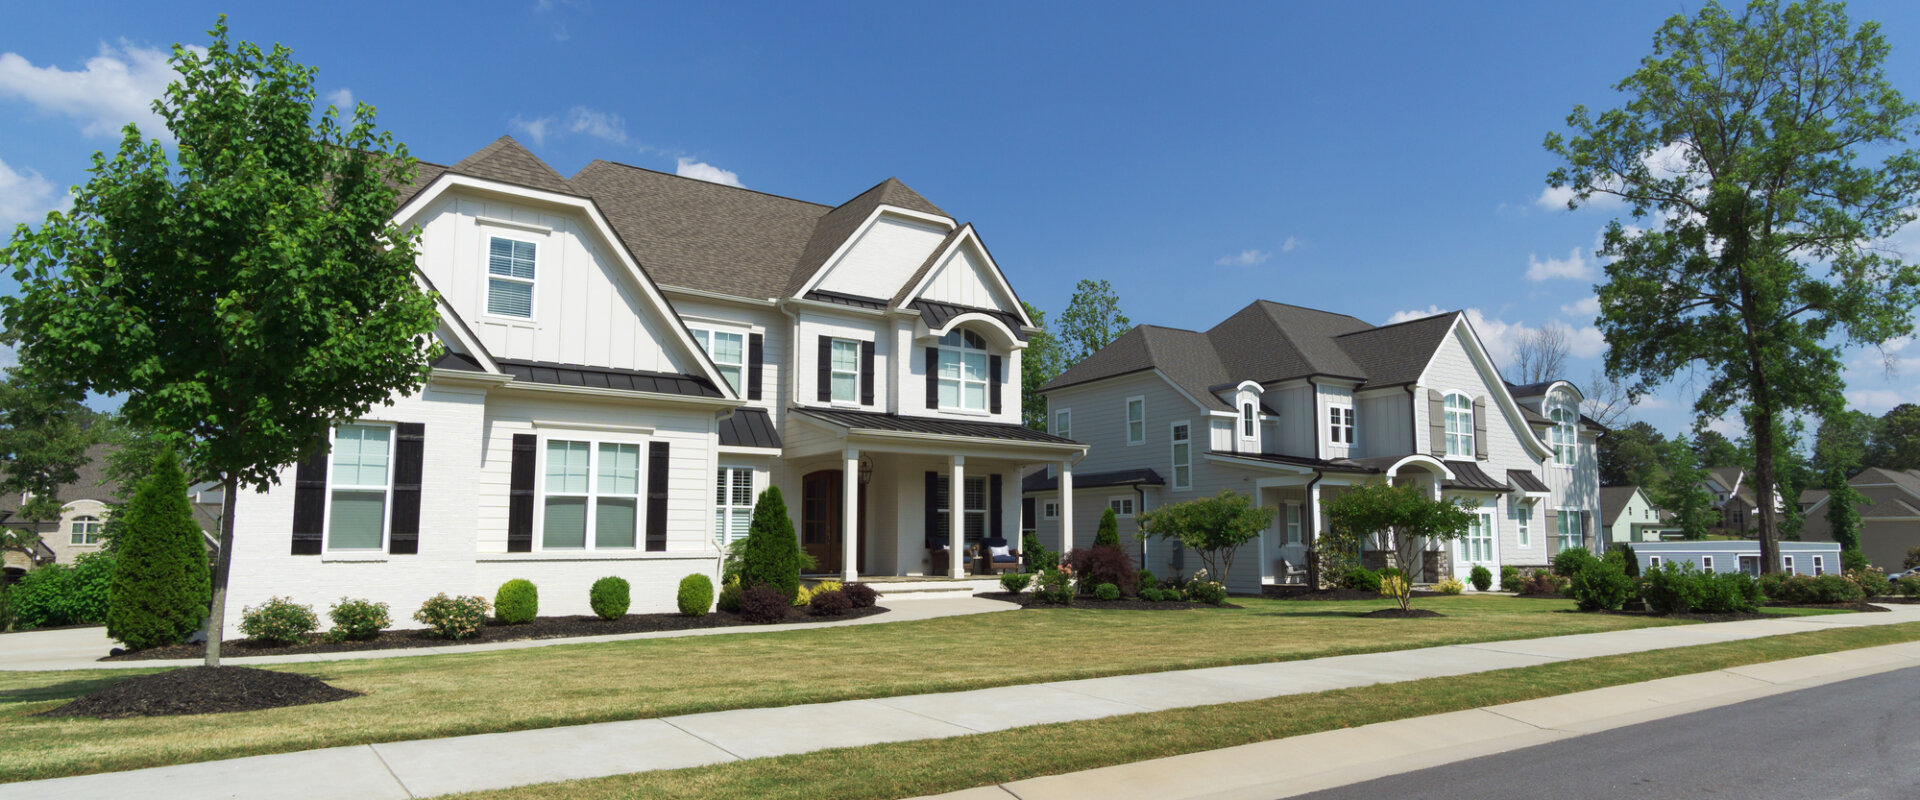 Sell Your House Fast In Livingston, NJ